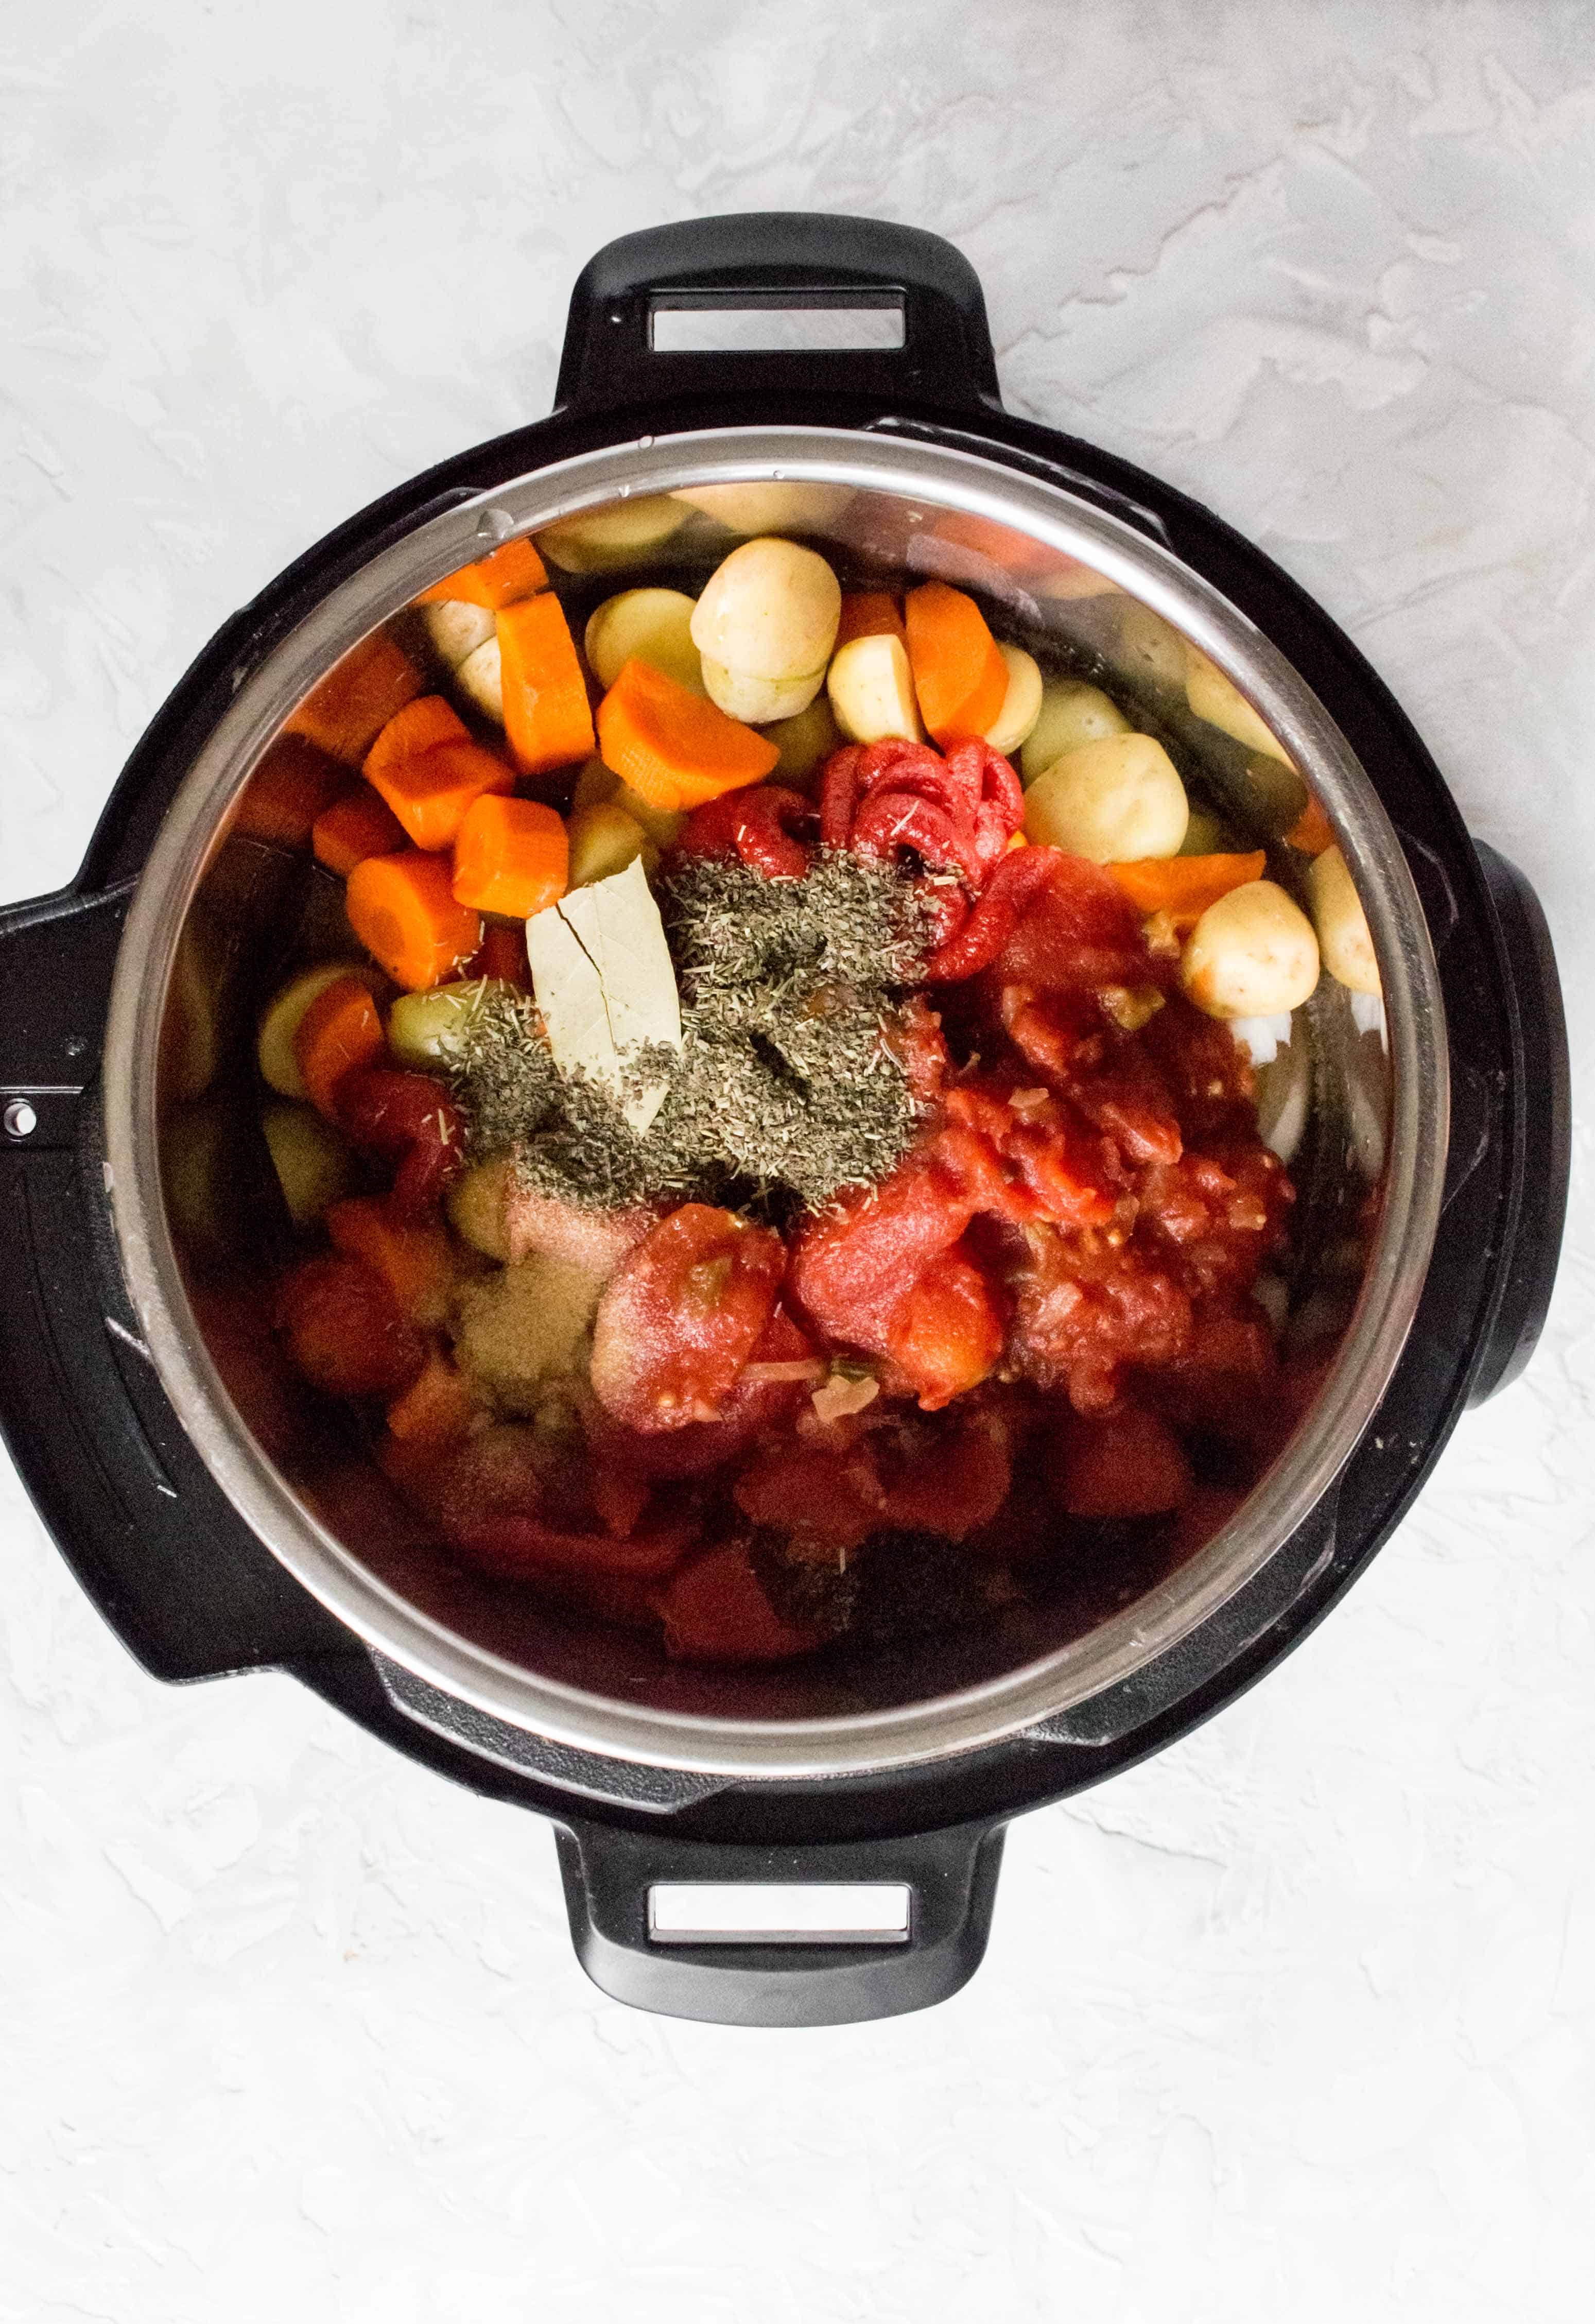 How To Make Beef and Tomato Stew in the Instant Pot